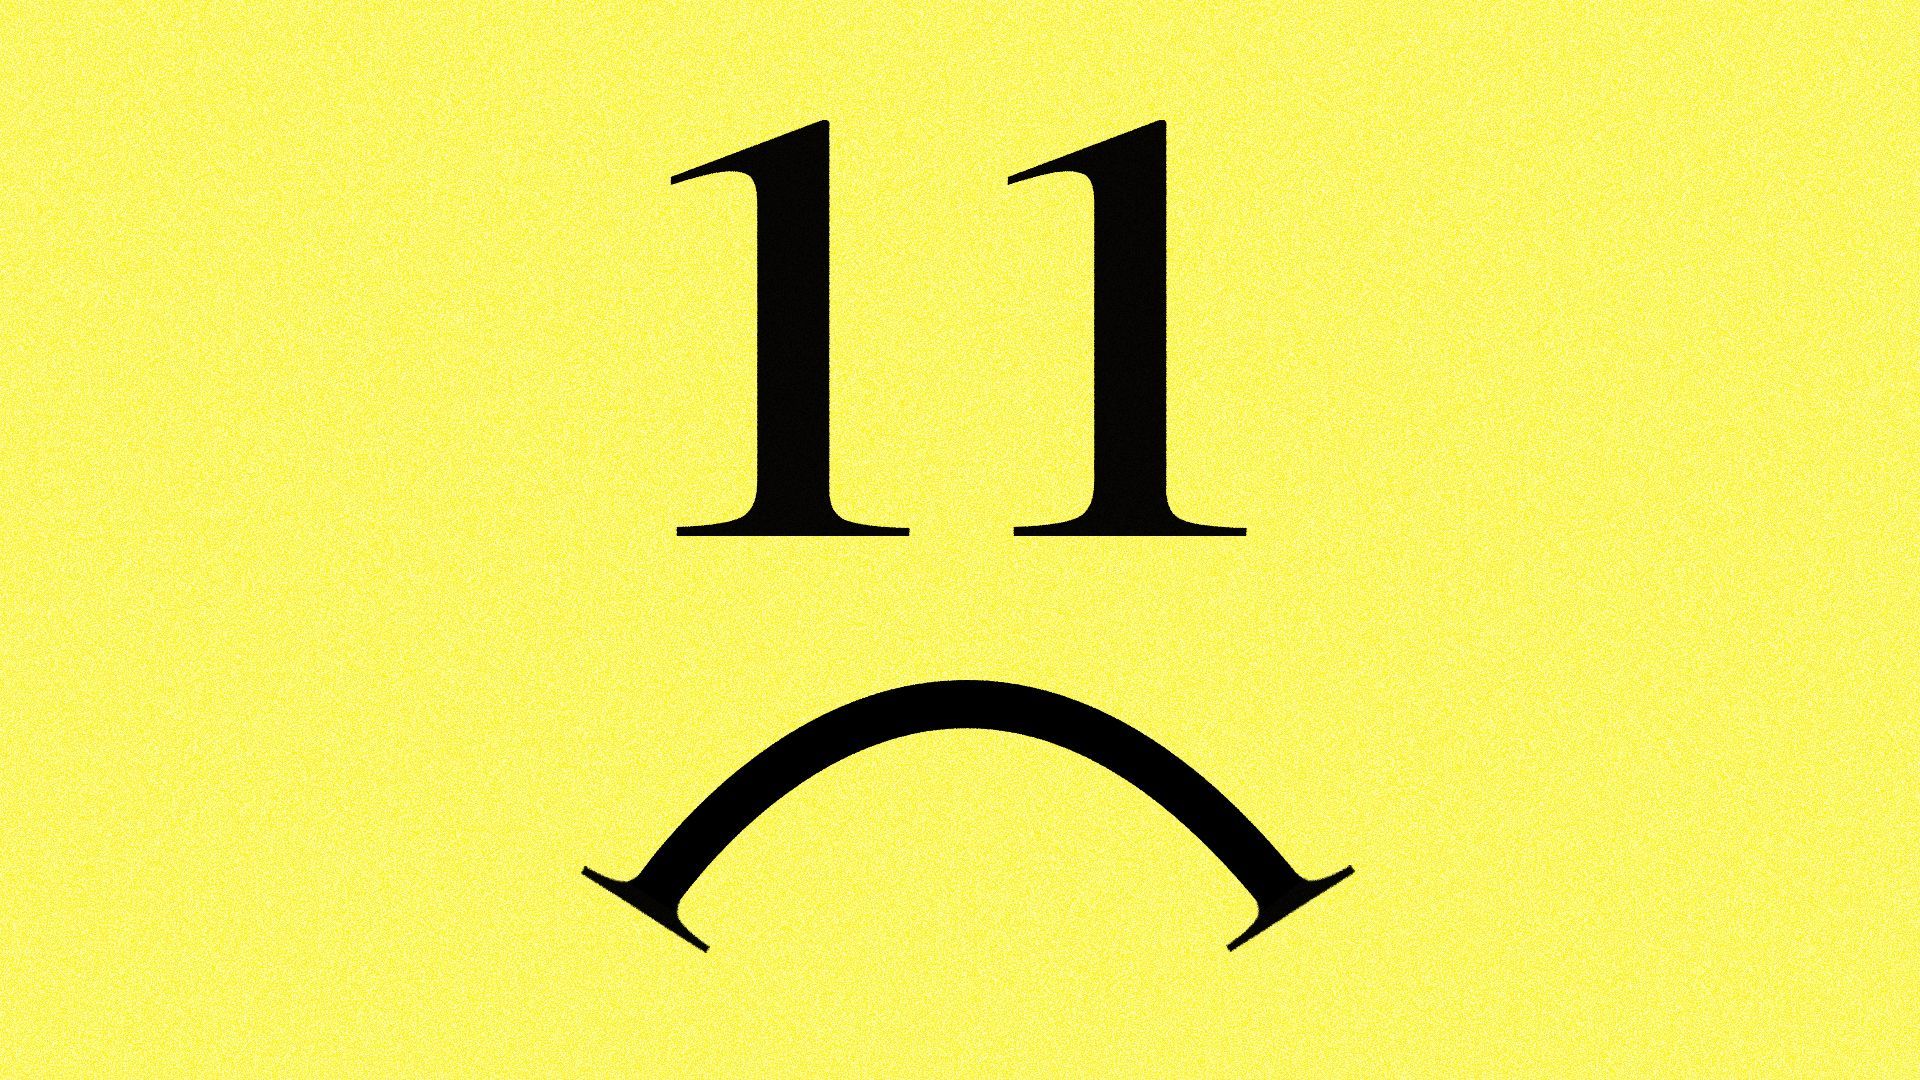 Illustration of a frowny face with "11" as the eyes.